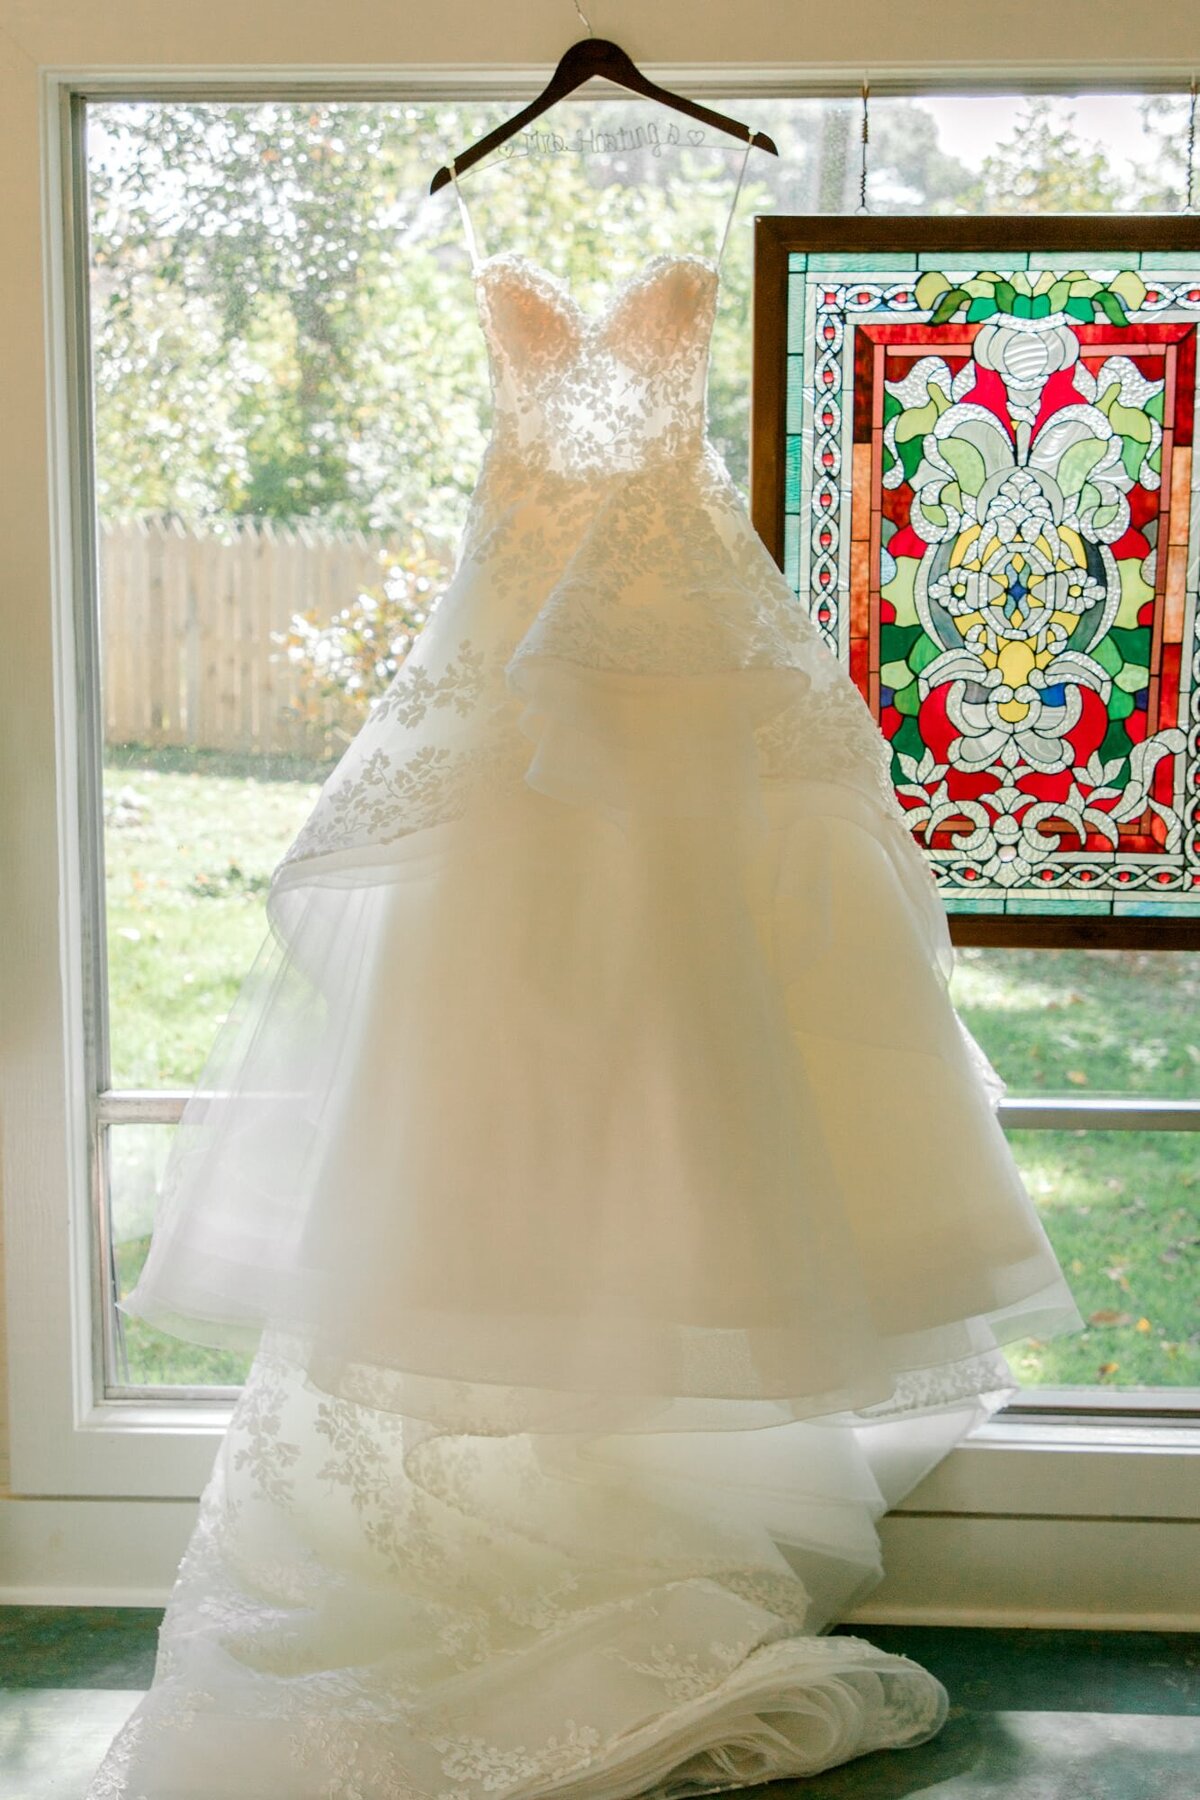 Wedding dress ballgown hanging in front of stained glass frame